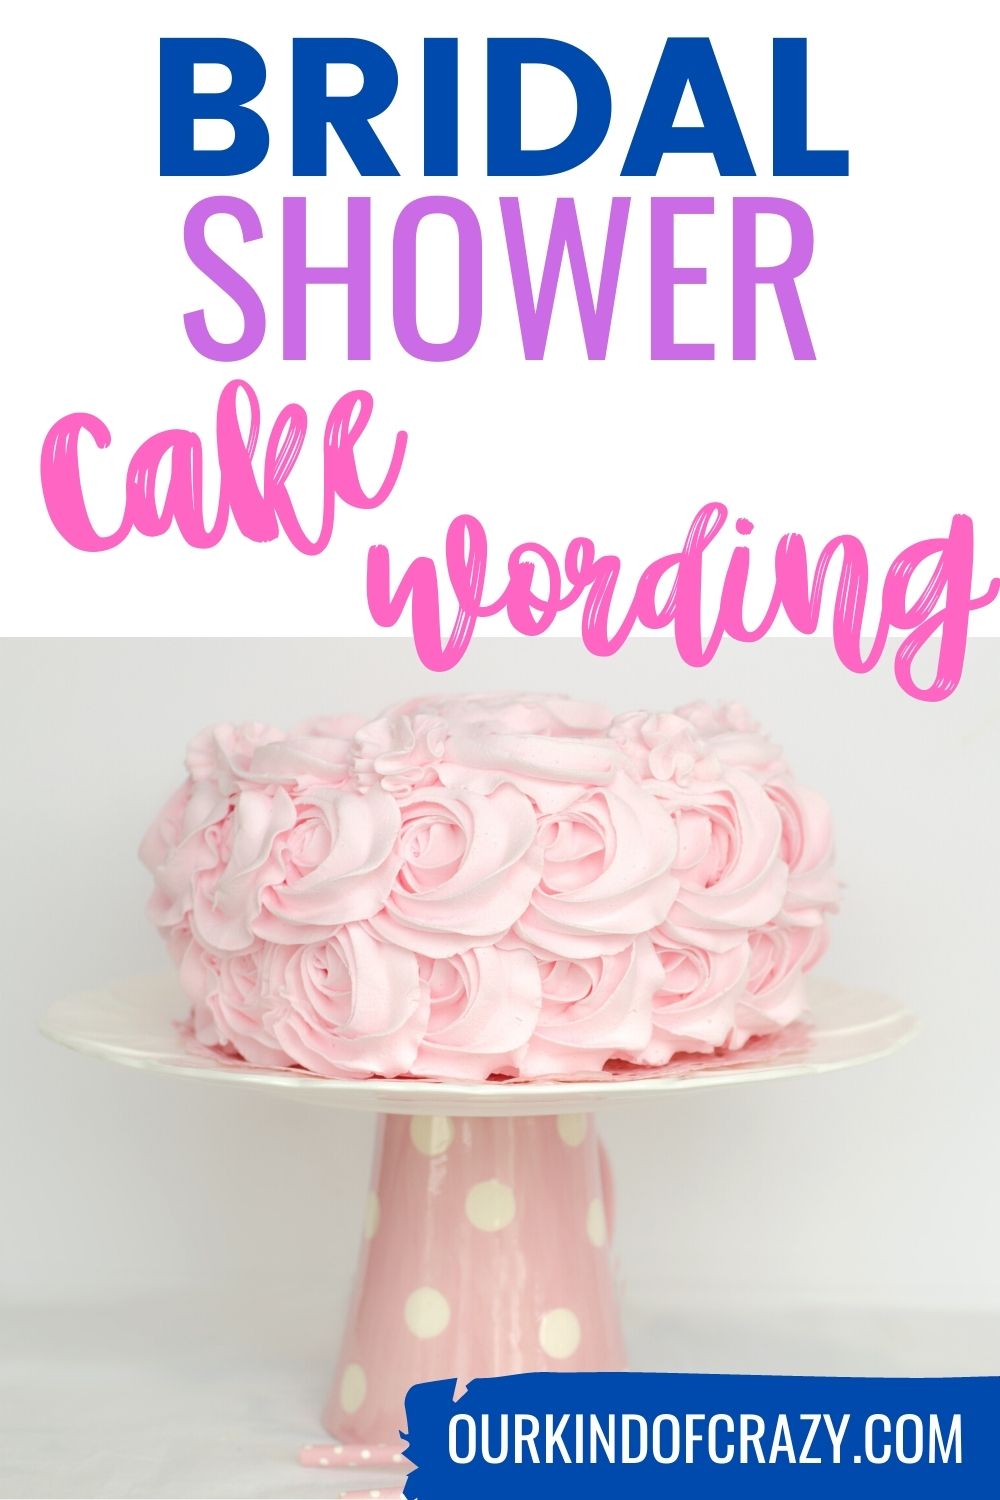 23 Bridal Shower Cake Ideas to Inspire Your Own